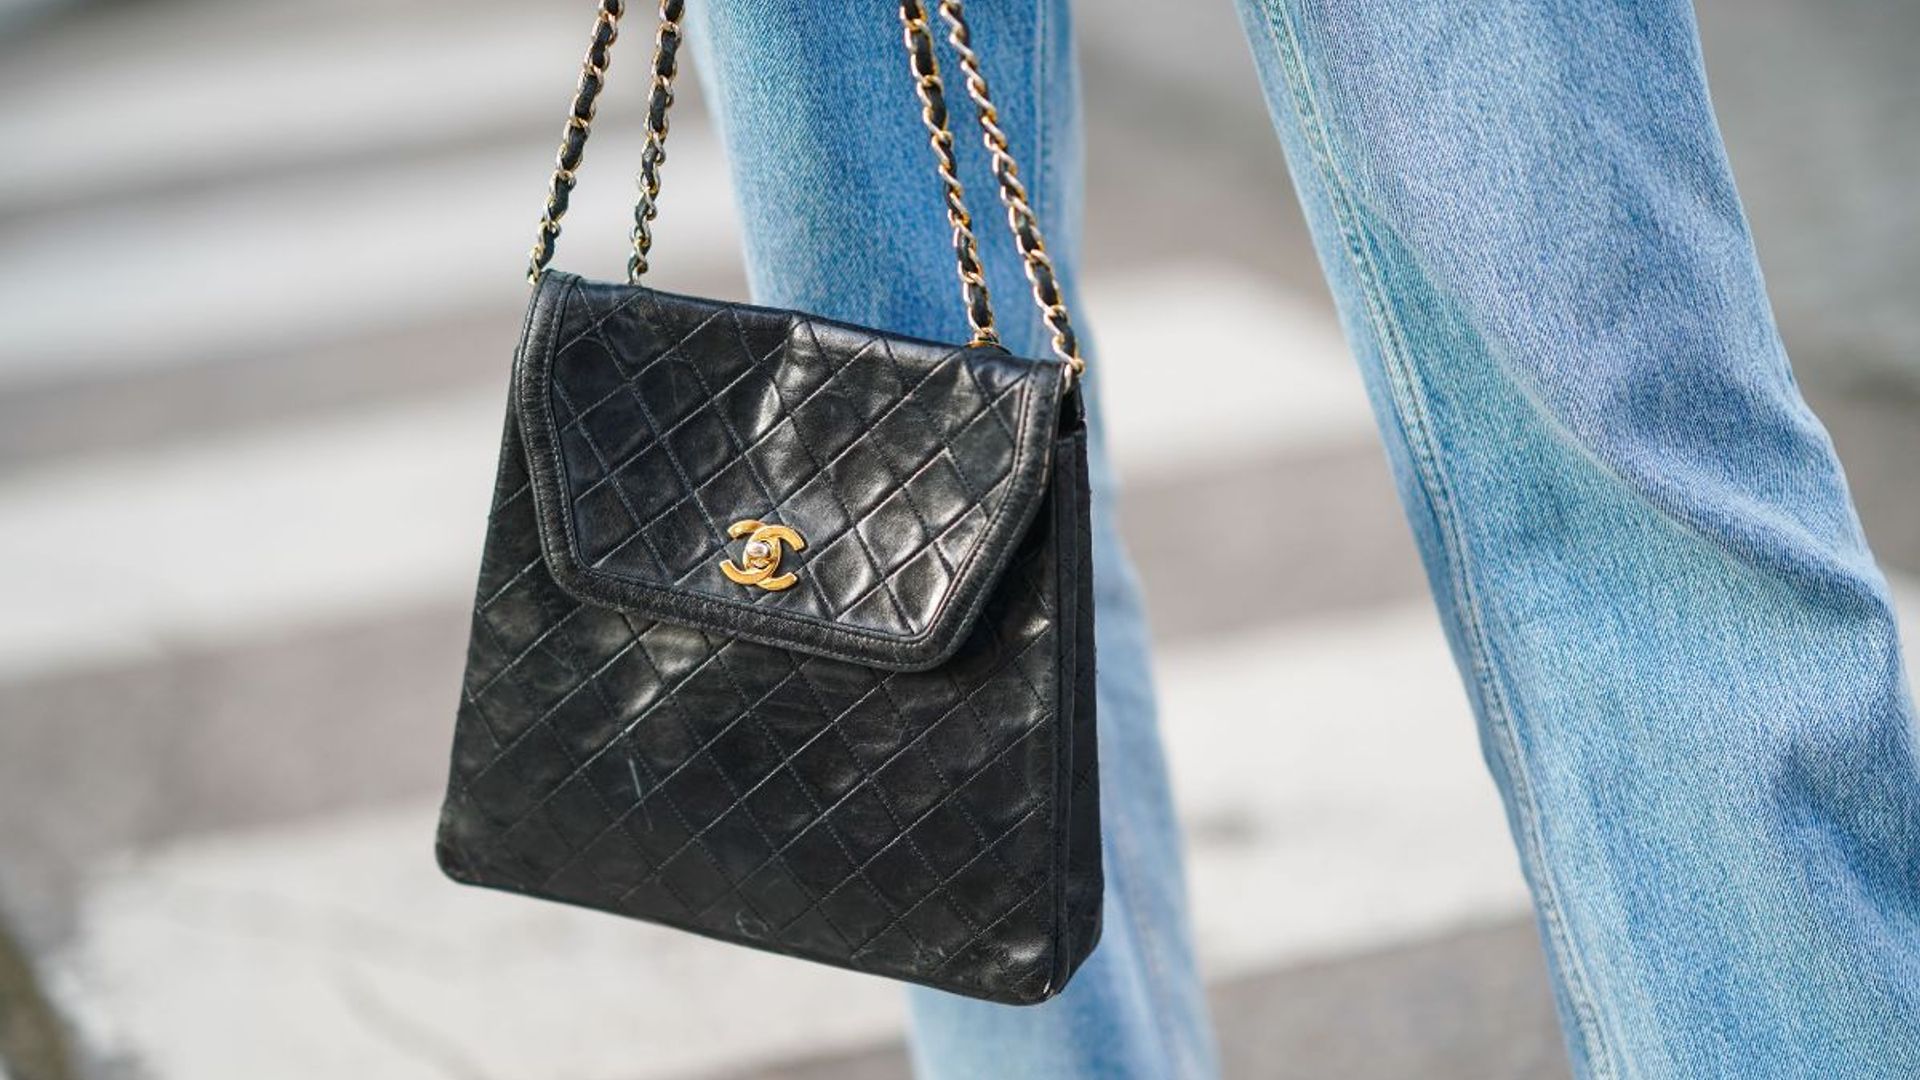 Vintage Chanel handbags: 5 things to know before making your first purchase